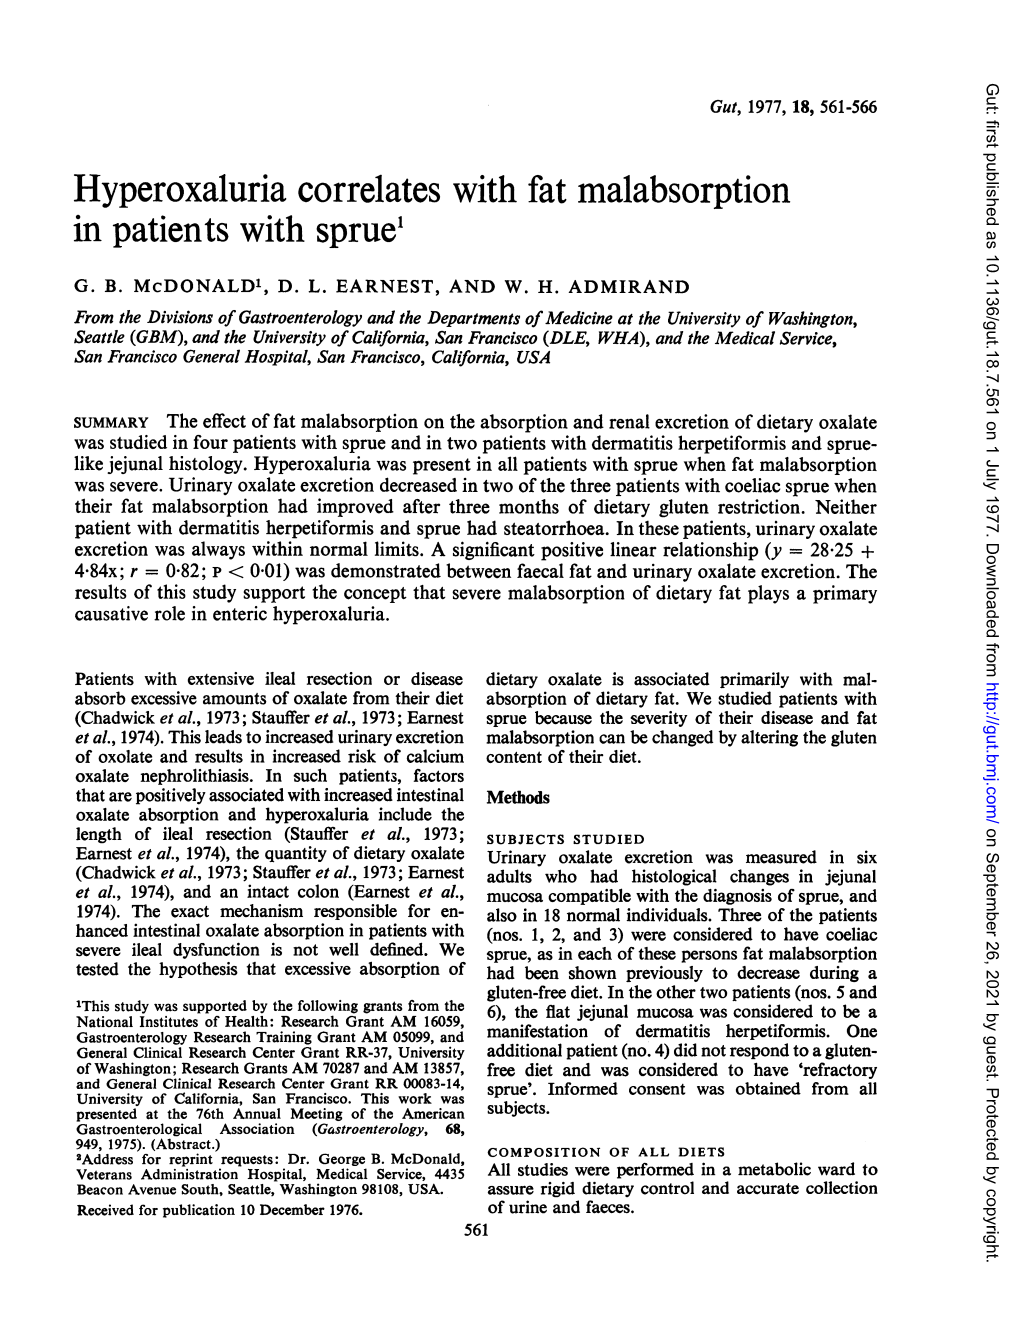 Hyperoxaluria Correlates with Fat Malabsorption in Patients with Sprue'